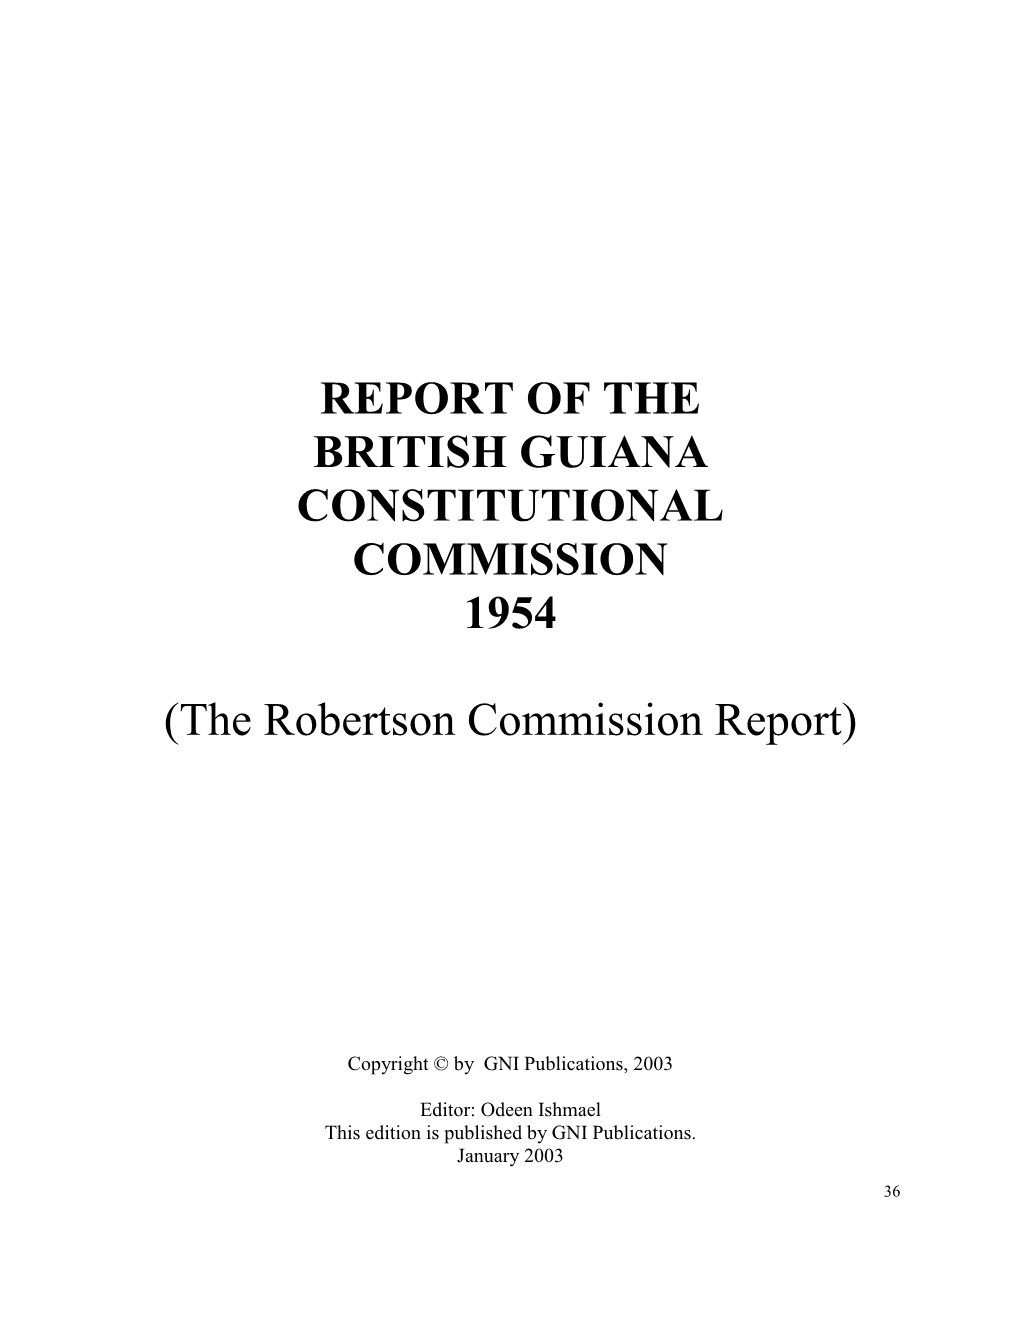 Report of the British Guiana Constitutional Commission 1954